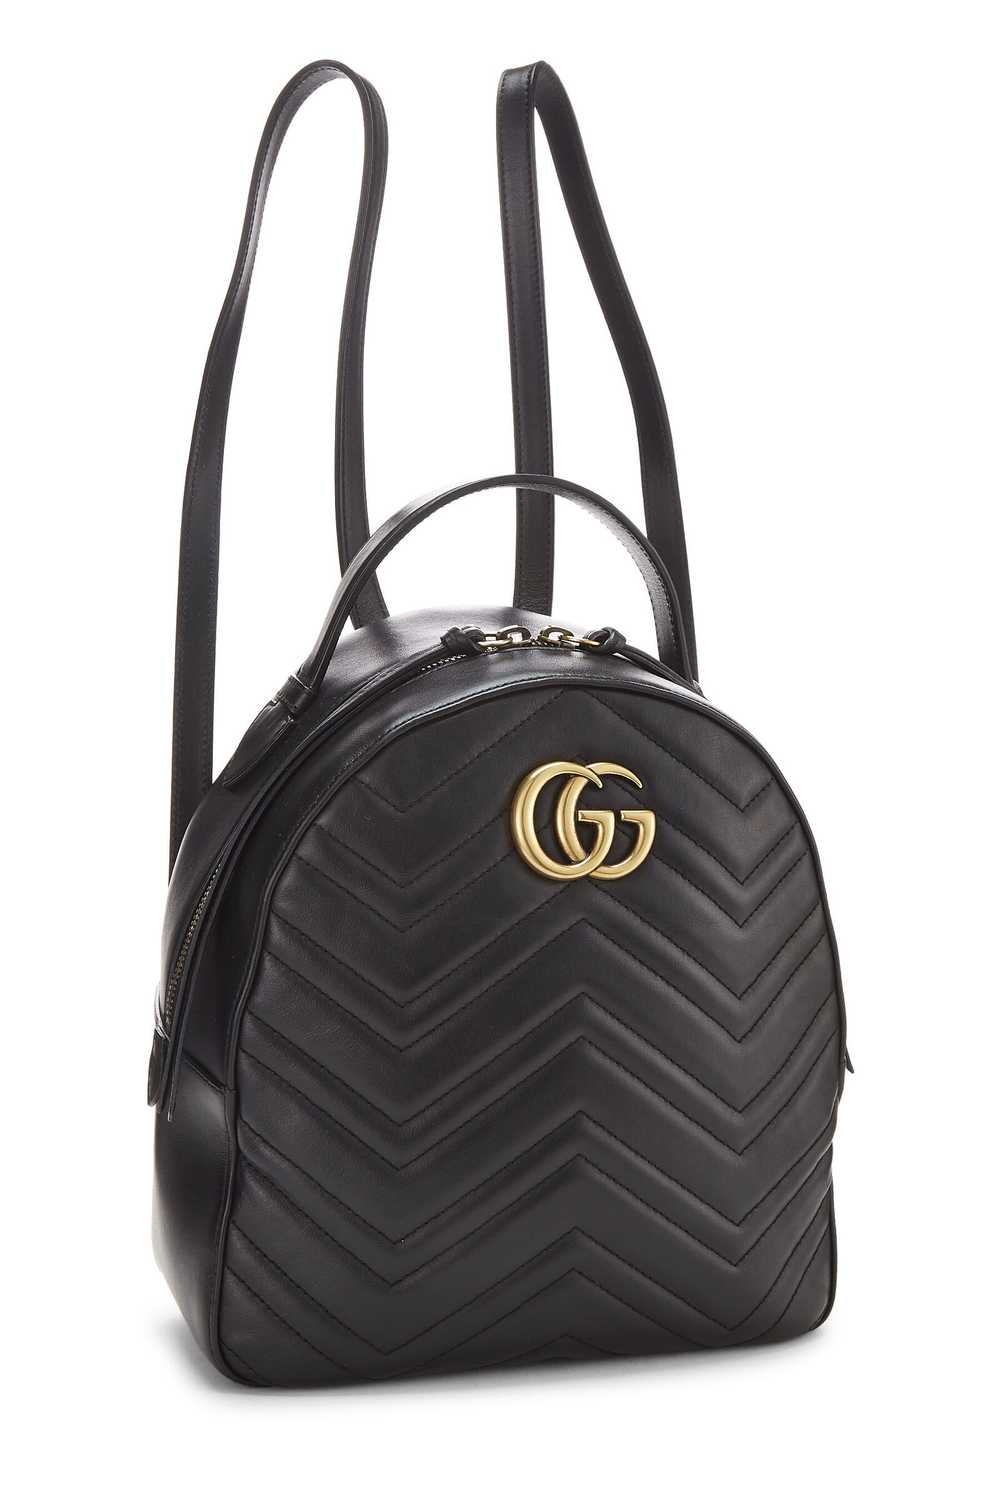 Black Leather Marmont Backpack - image 3